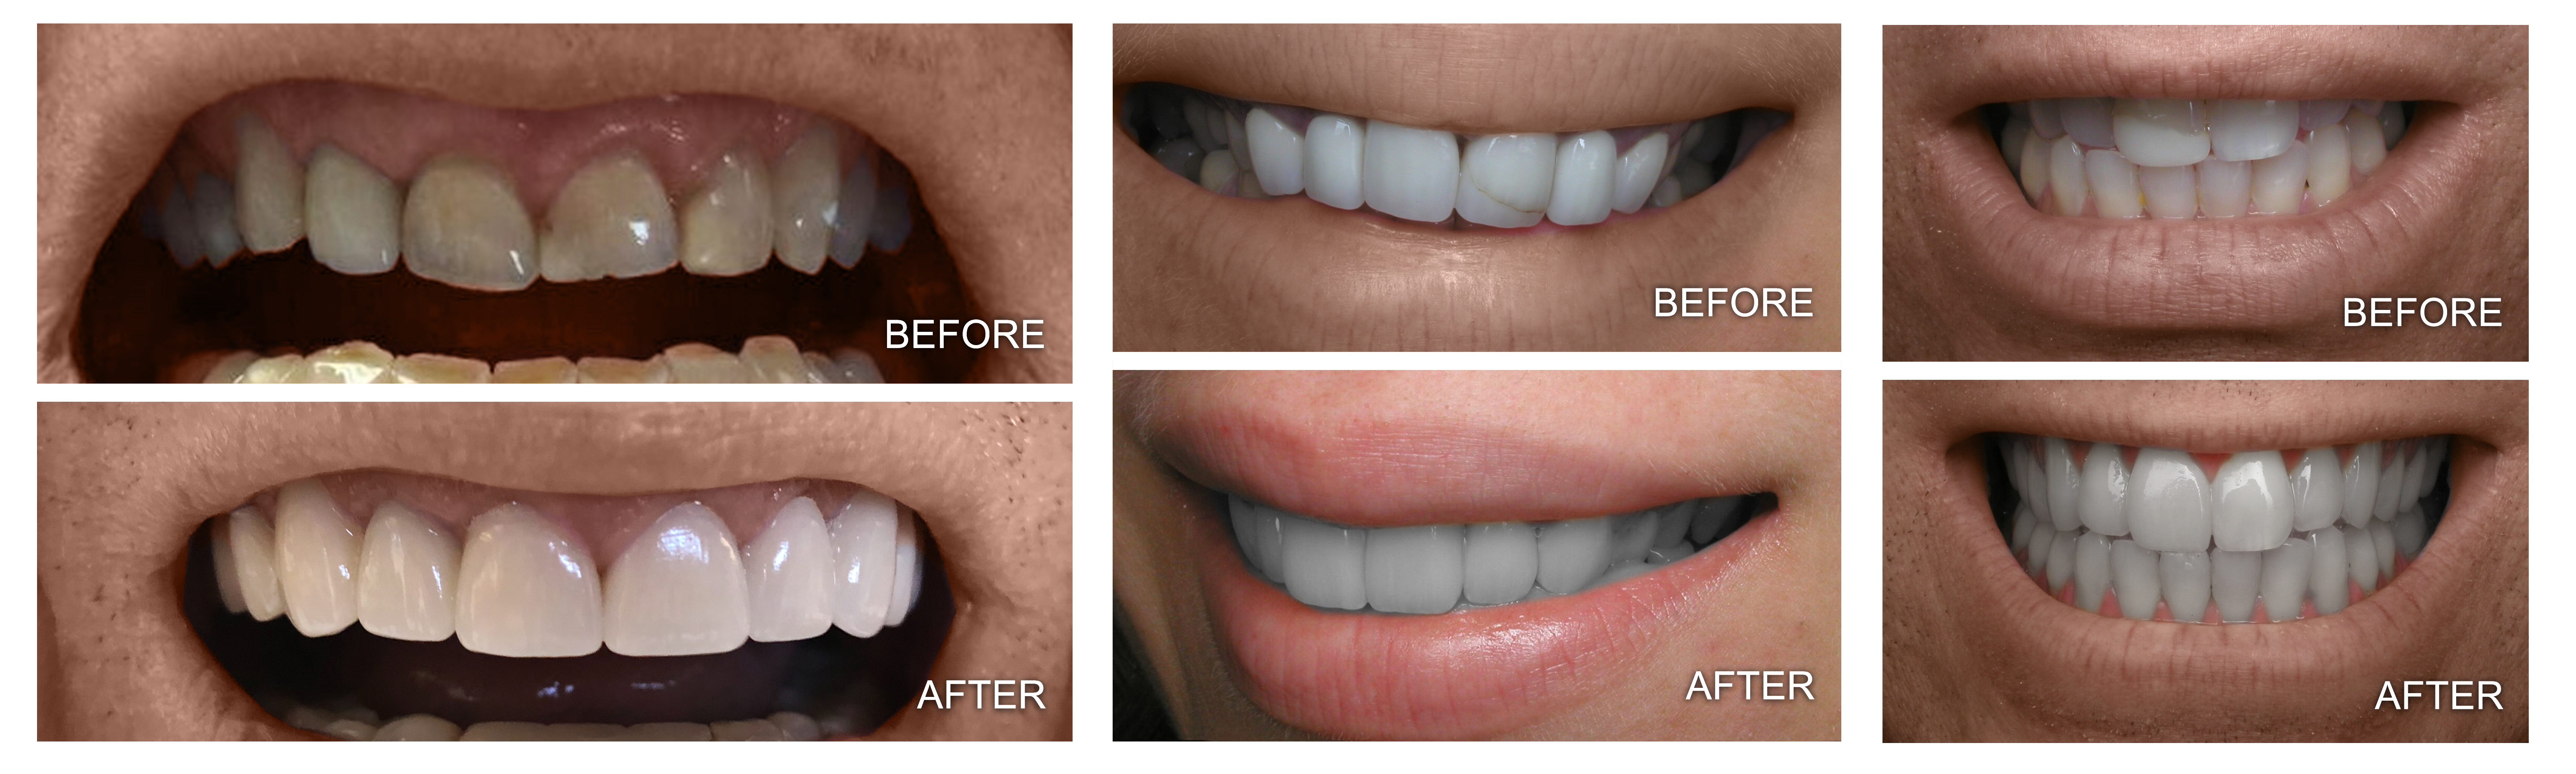 Before and After Our Dental Services in Framingham, MA